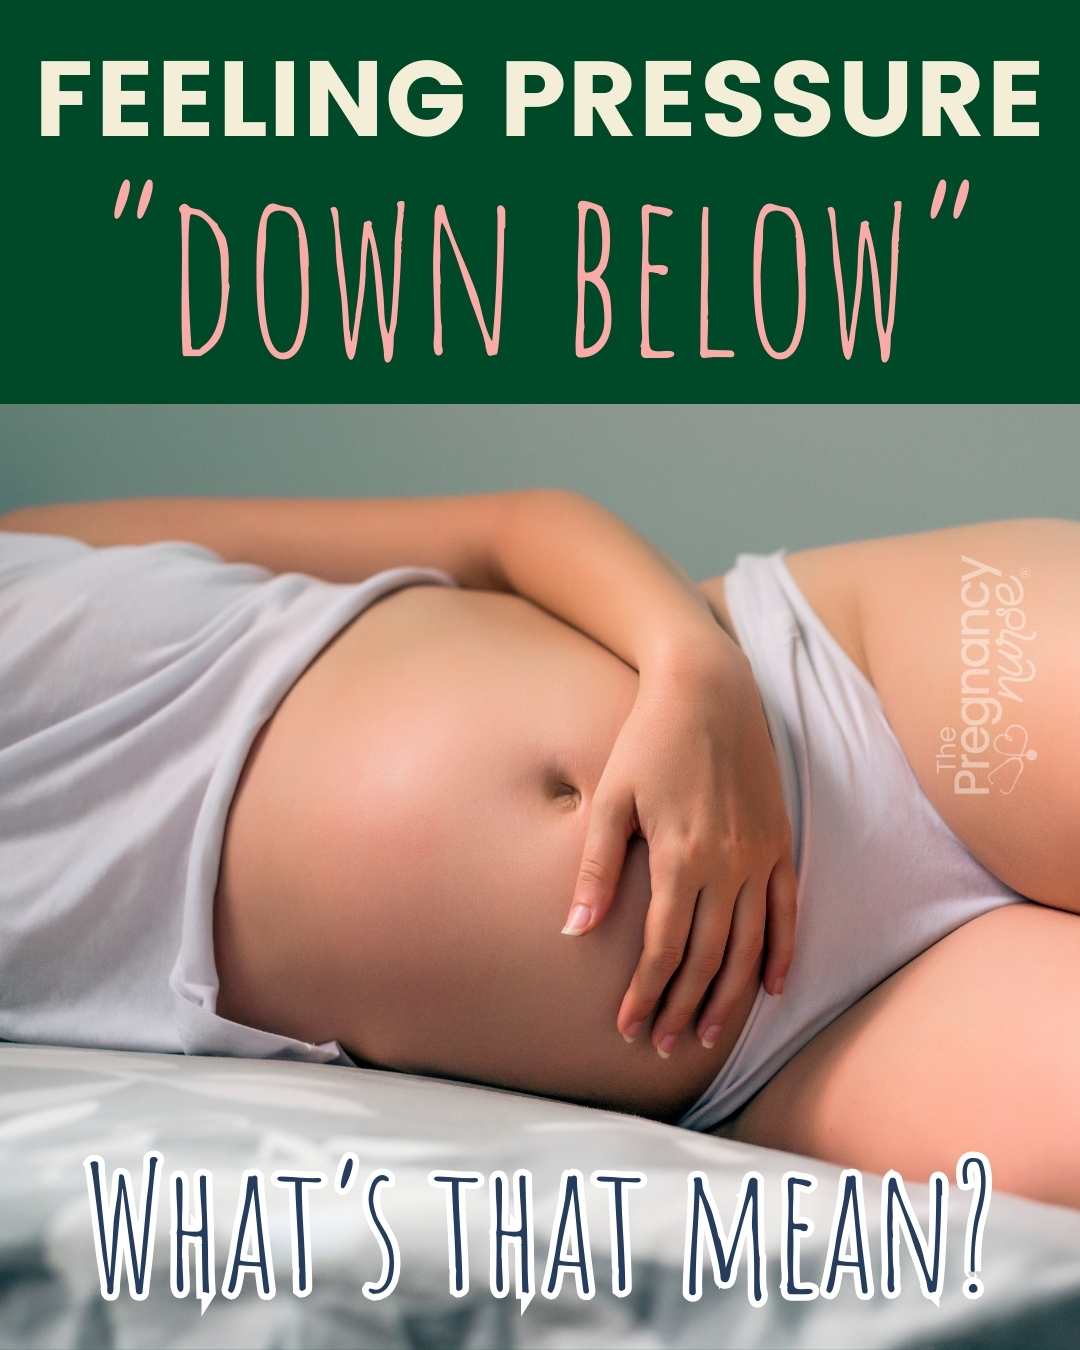 As your pregnancy progresses, you may start to feel more pressure down below. This is normal and is normally caused by the baby's head pressing down on your cervix. You may also experience some pelvic cramping as your muscles stretch to accommodate your growing baby. Don't worry – these symptoms are just signs that labor is getting closer! In this post we're going to explain some common reasons for the pressure, if there's anything you can do about it and when you should talk with your provider.